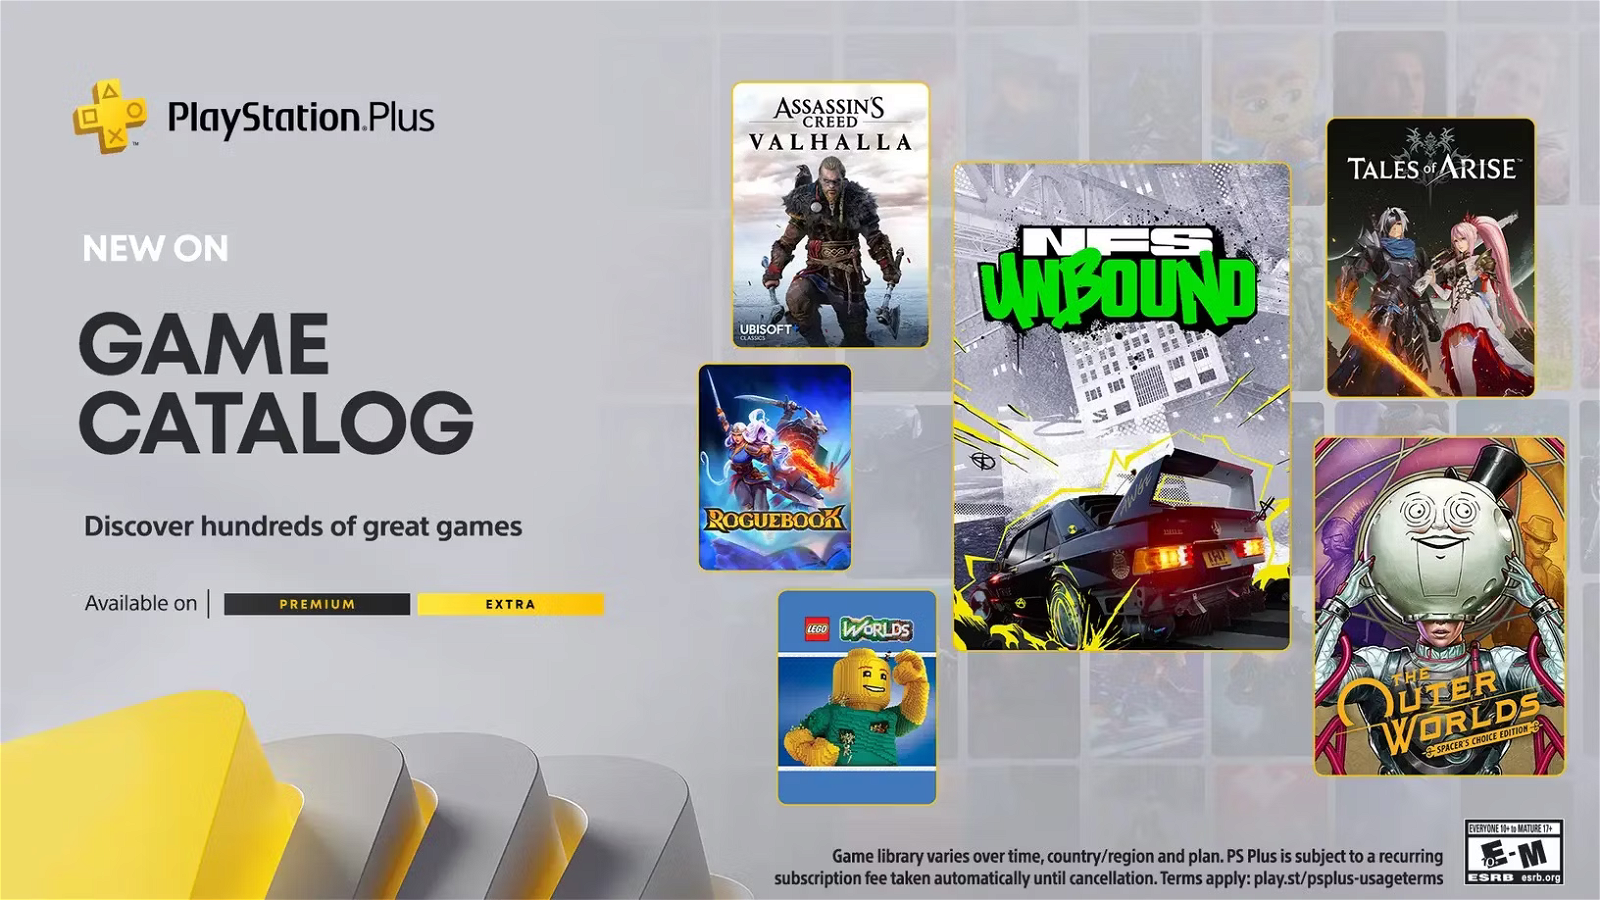 A new set of games is all set to hit the PS Plus catalog